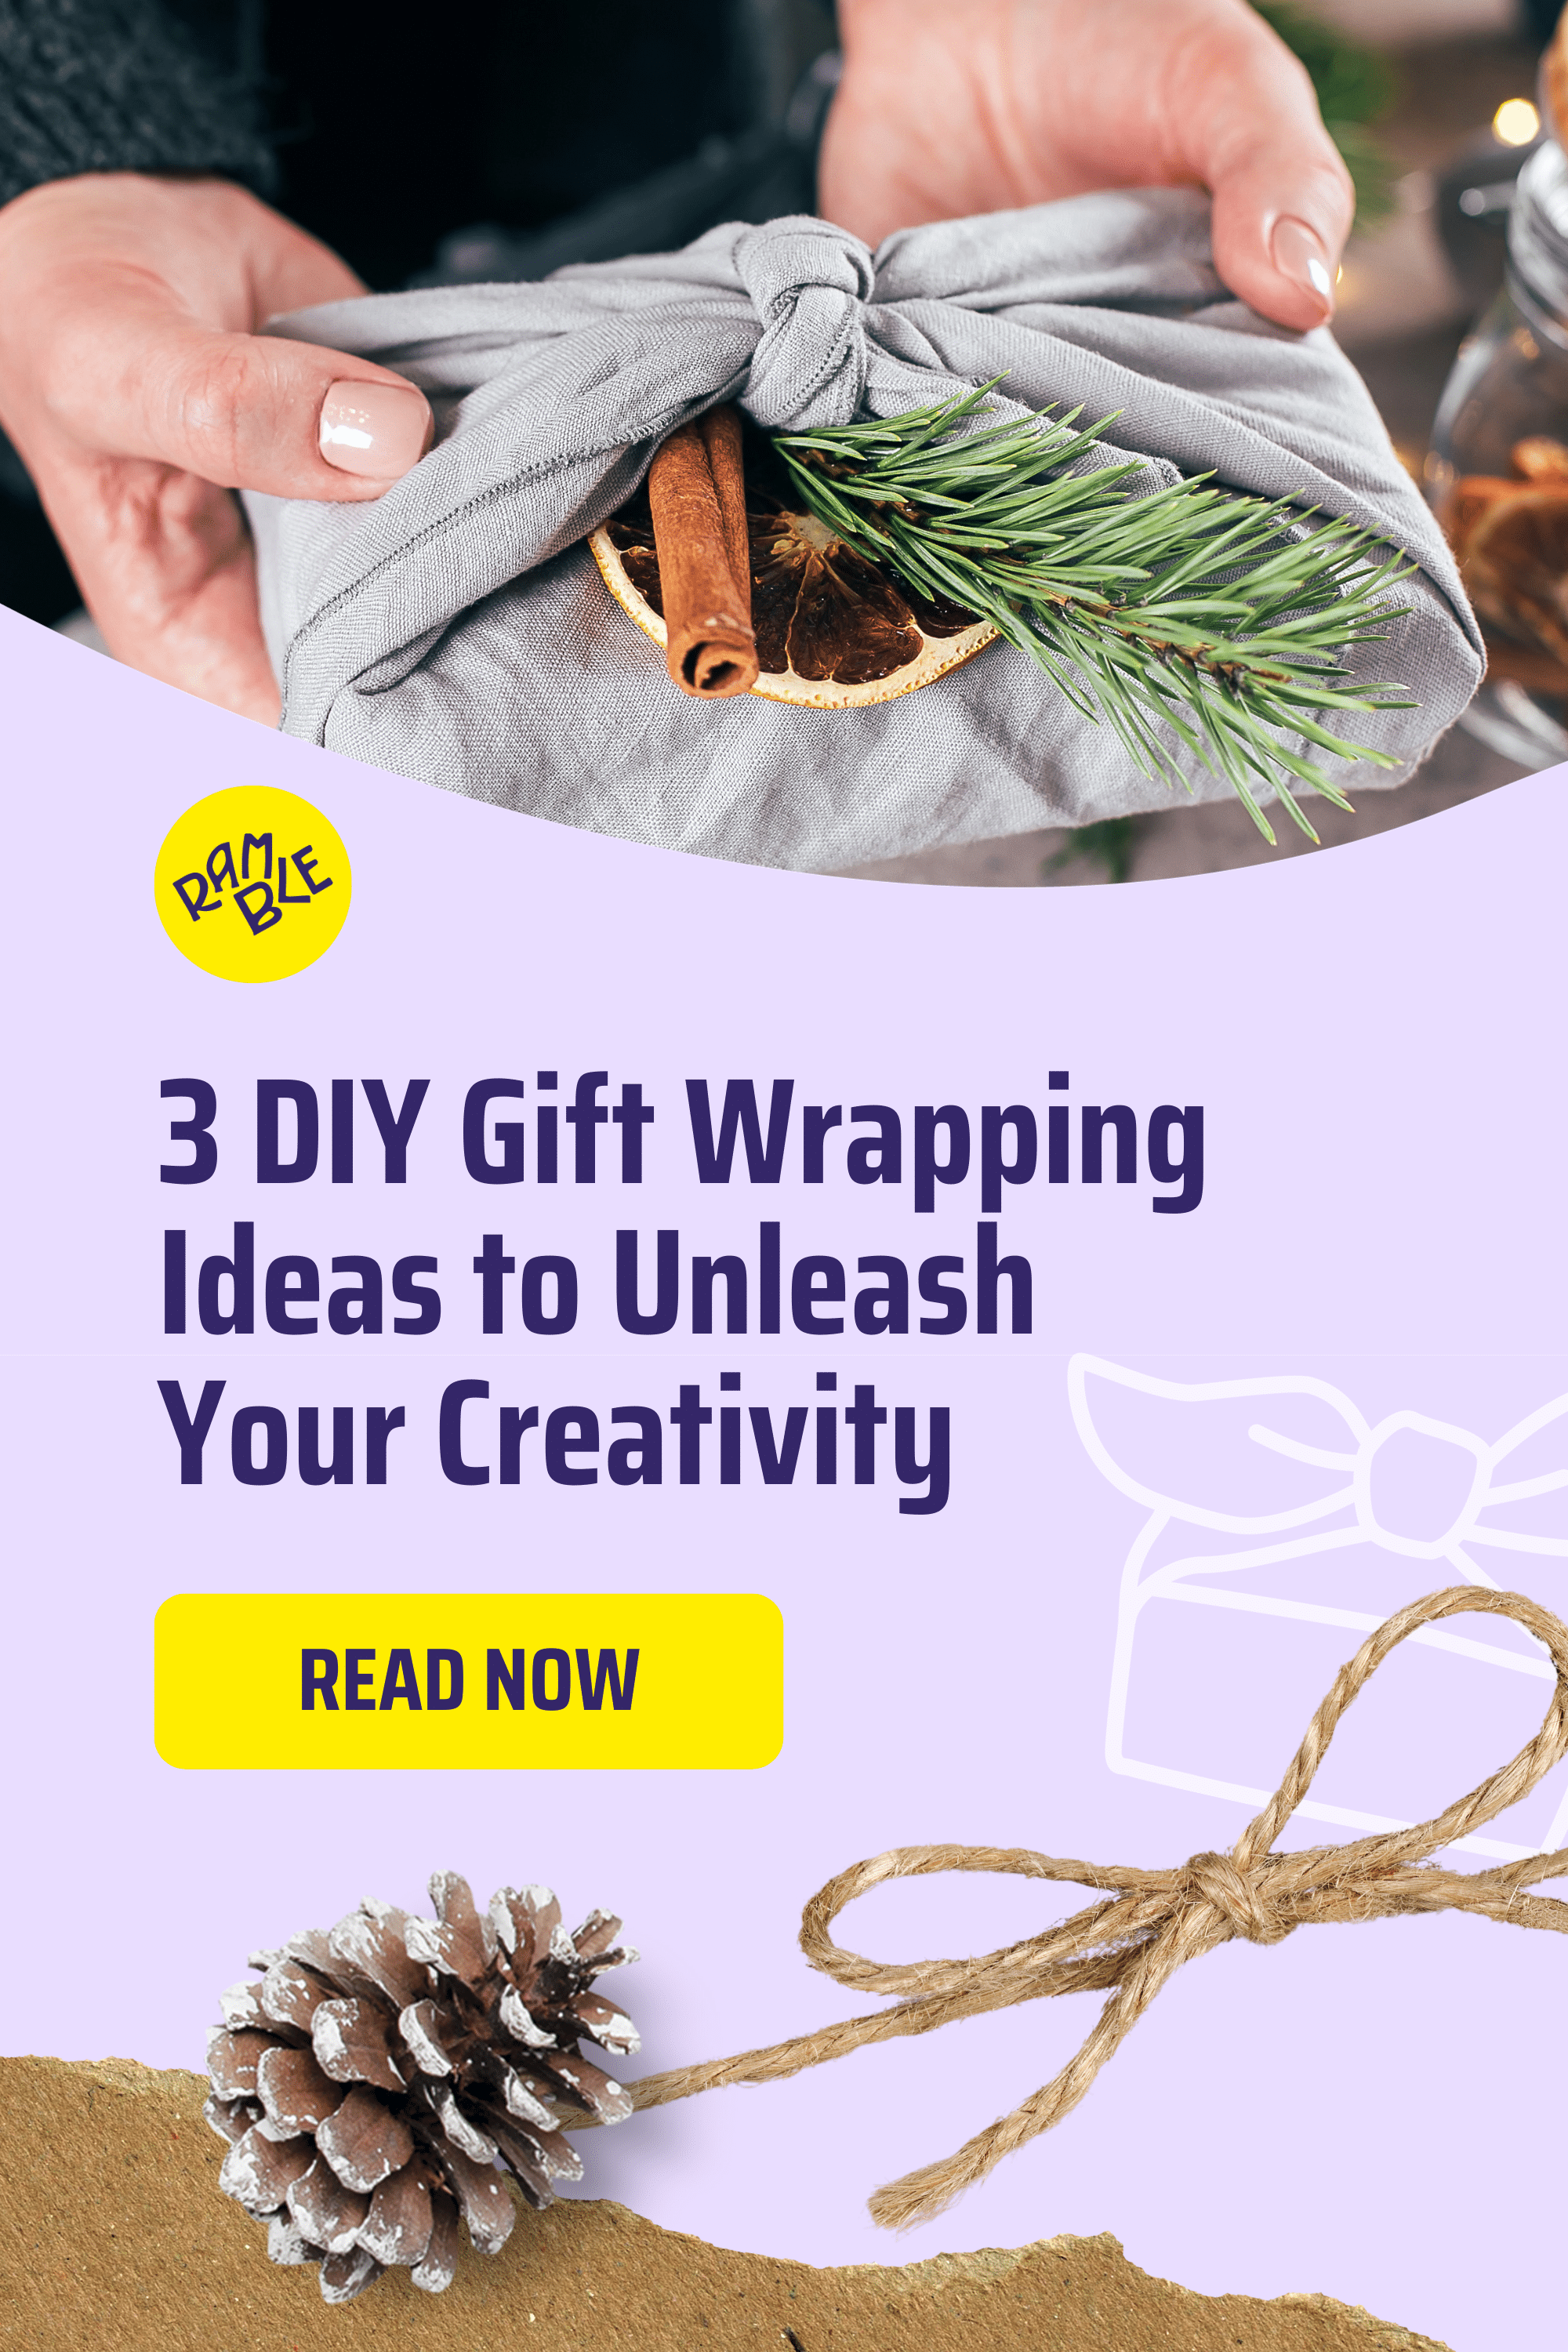 Pinterest—Ramble Gifts: 3 DIY Gift Wrapping Ideas